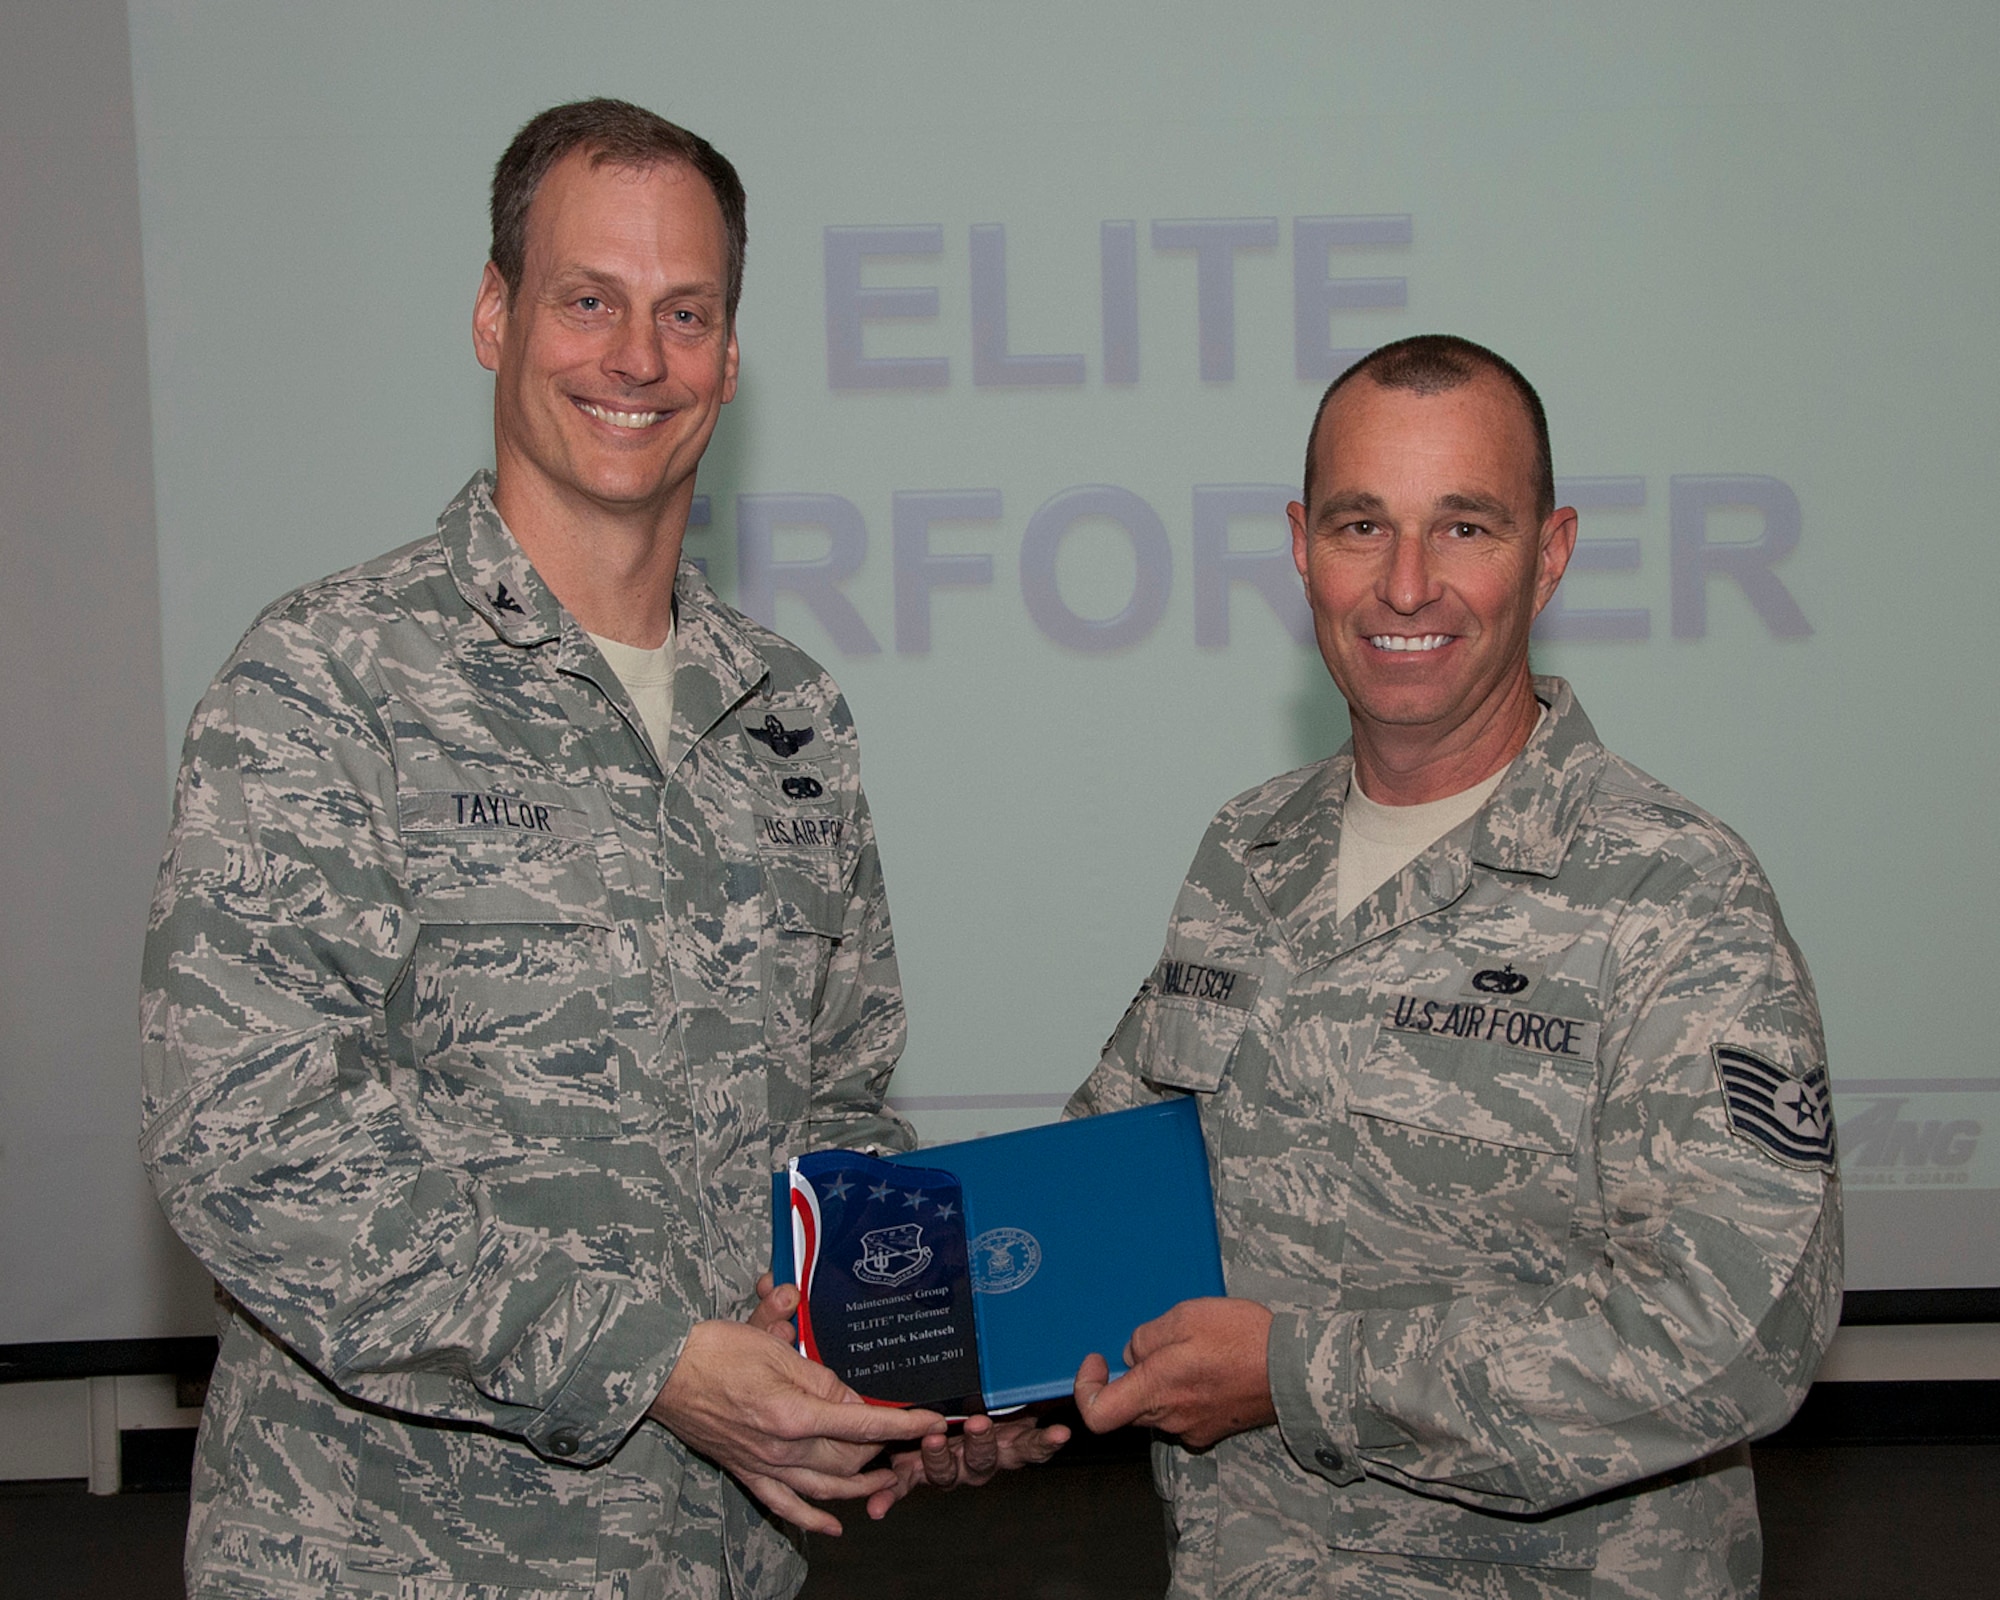 Col. James Taylor (left) presents Tech. Sgt. Mark Kaletsch the Elite Performer Award for his work with the 148th Fighter Squadron. (U.S. Air Force photo/Master Sgt. David Neve)